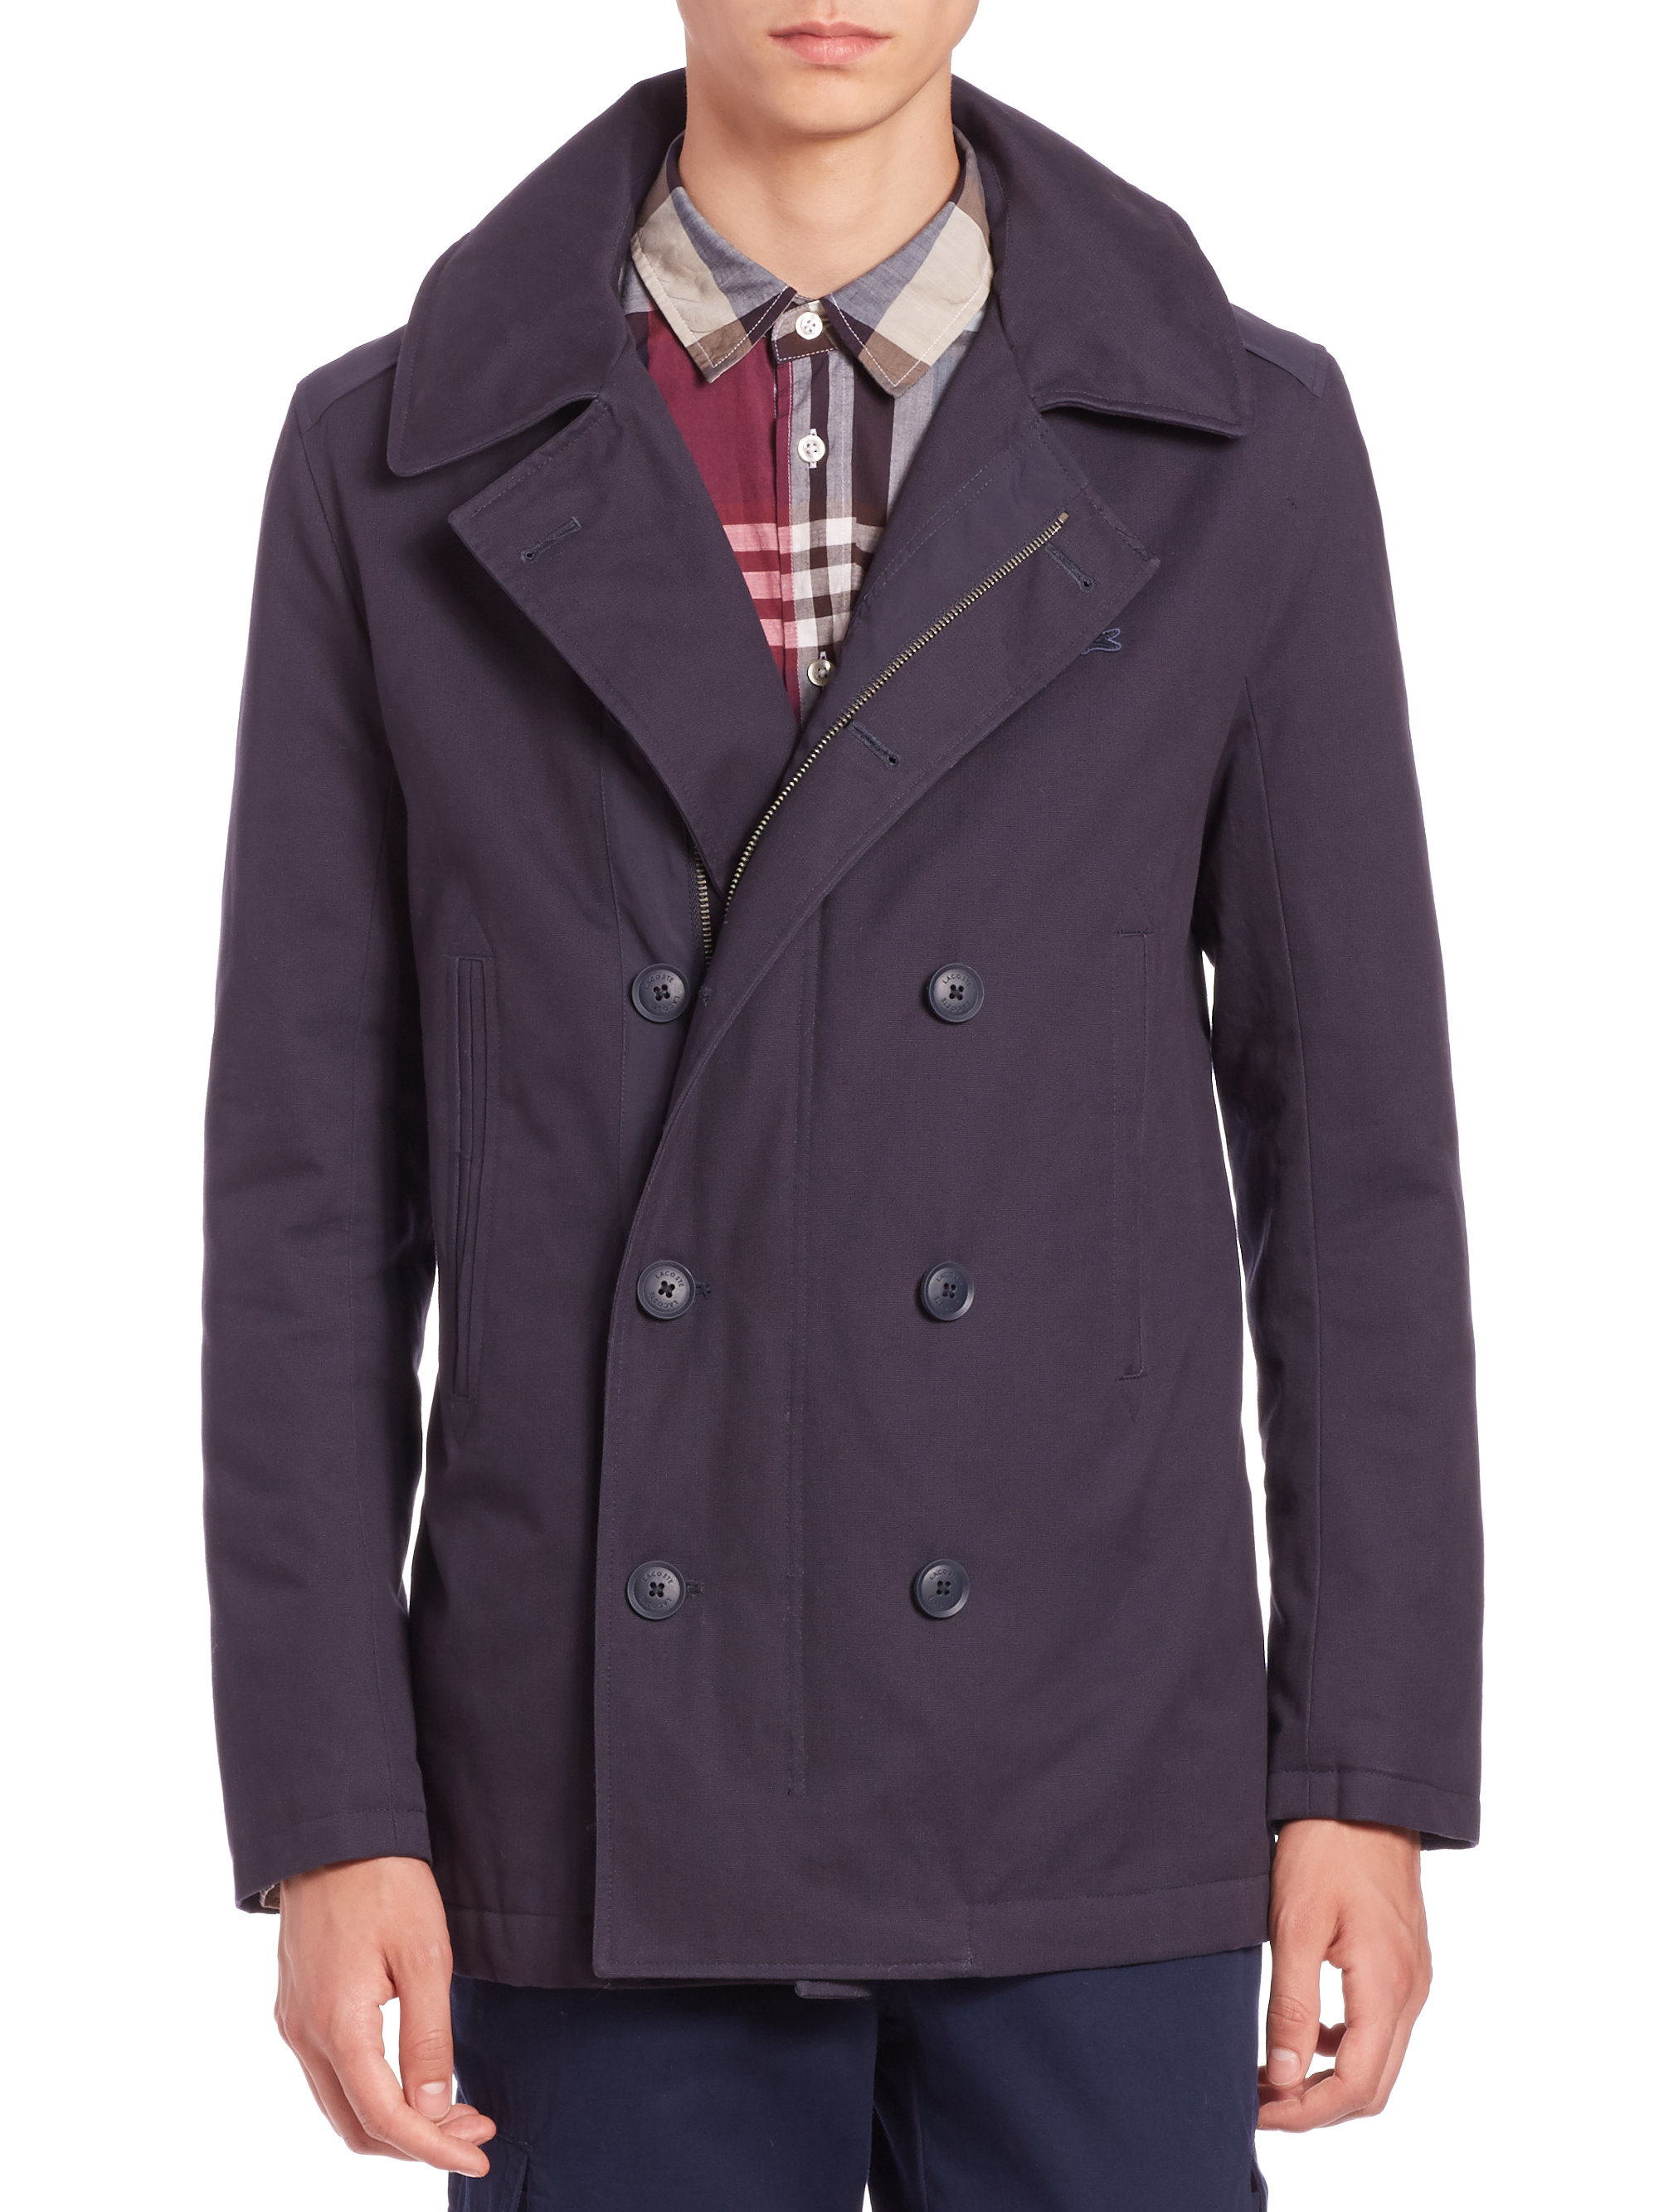 Lyst - Lacoste Cotton Hooded Peacoat in Blue for Men